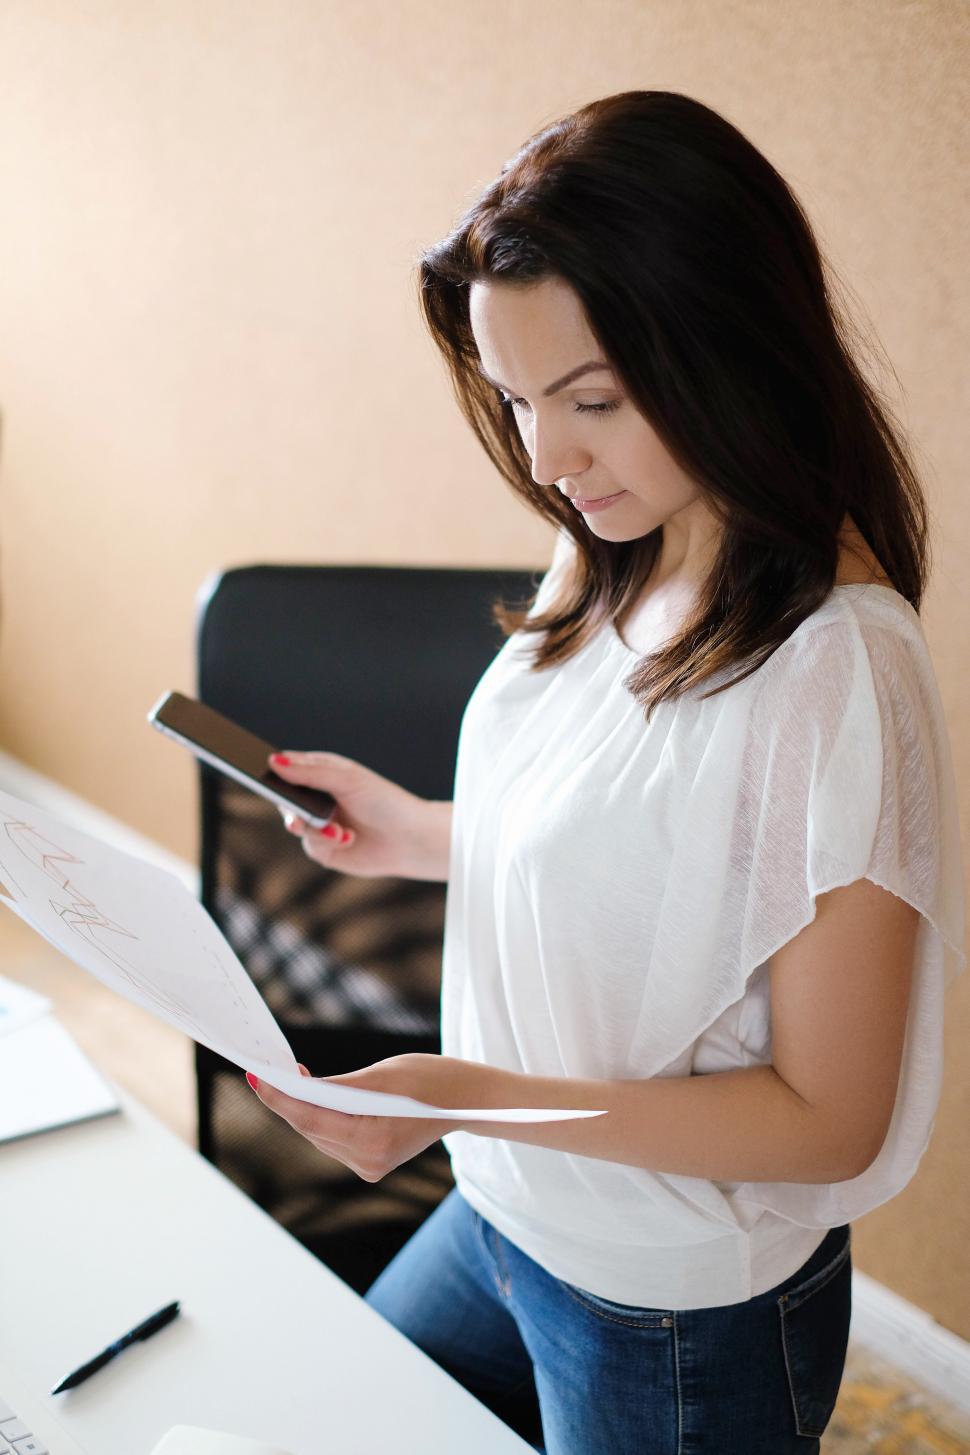 Free Image of Woman at work reviewing materials 